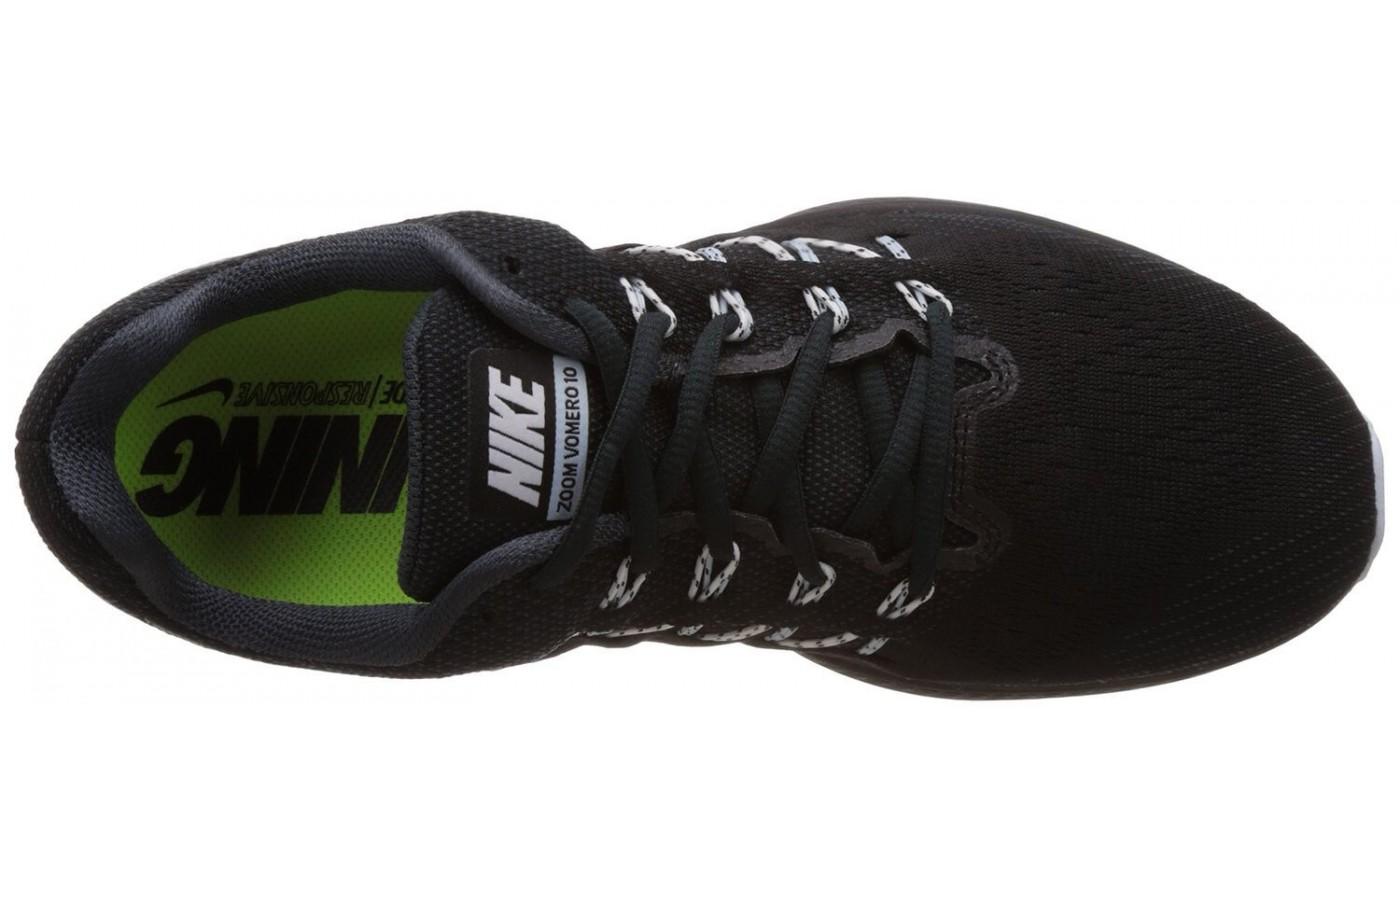 The Nike Air Zoom Vomero 10 uses Flymesh material to provide a lightweight upper.